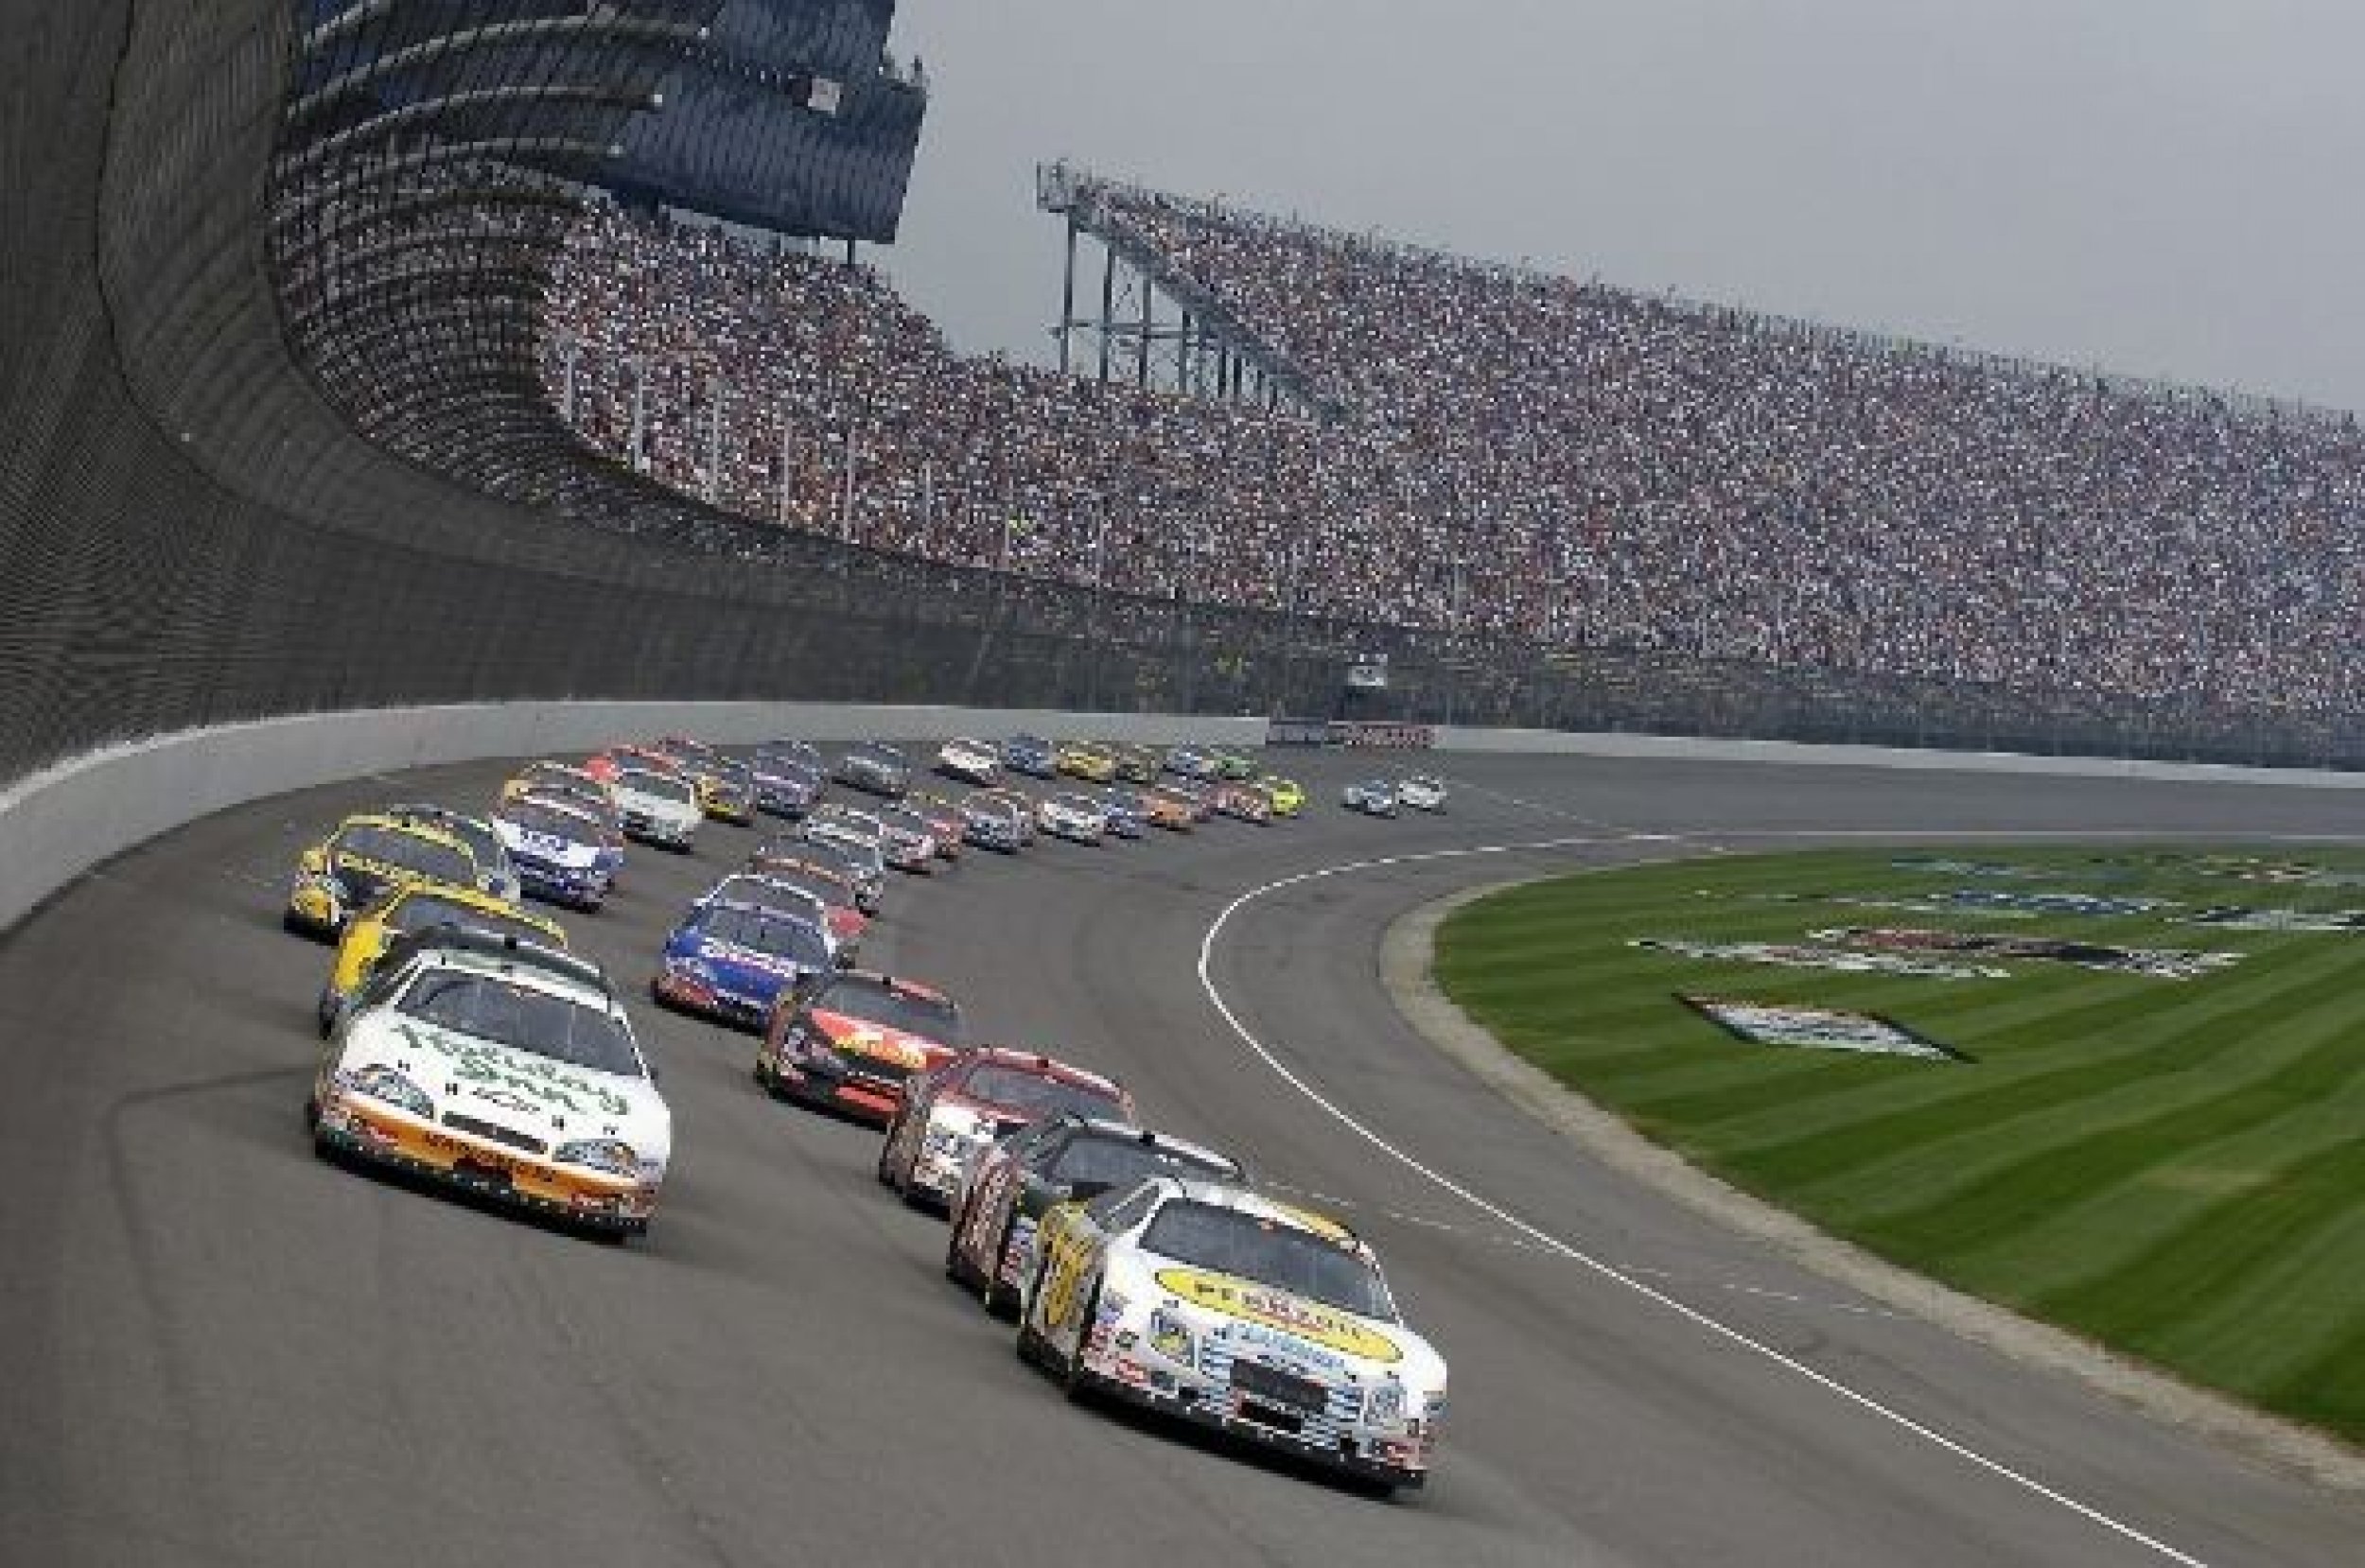 NASCAR at Michigan 2012 Live Stream, Where and When to Watch, Preview and Starting Order for the Quicken Loans 400 IBTimes